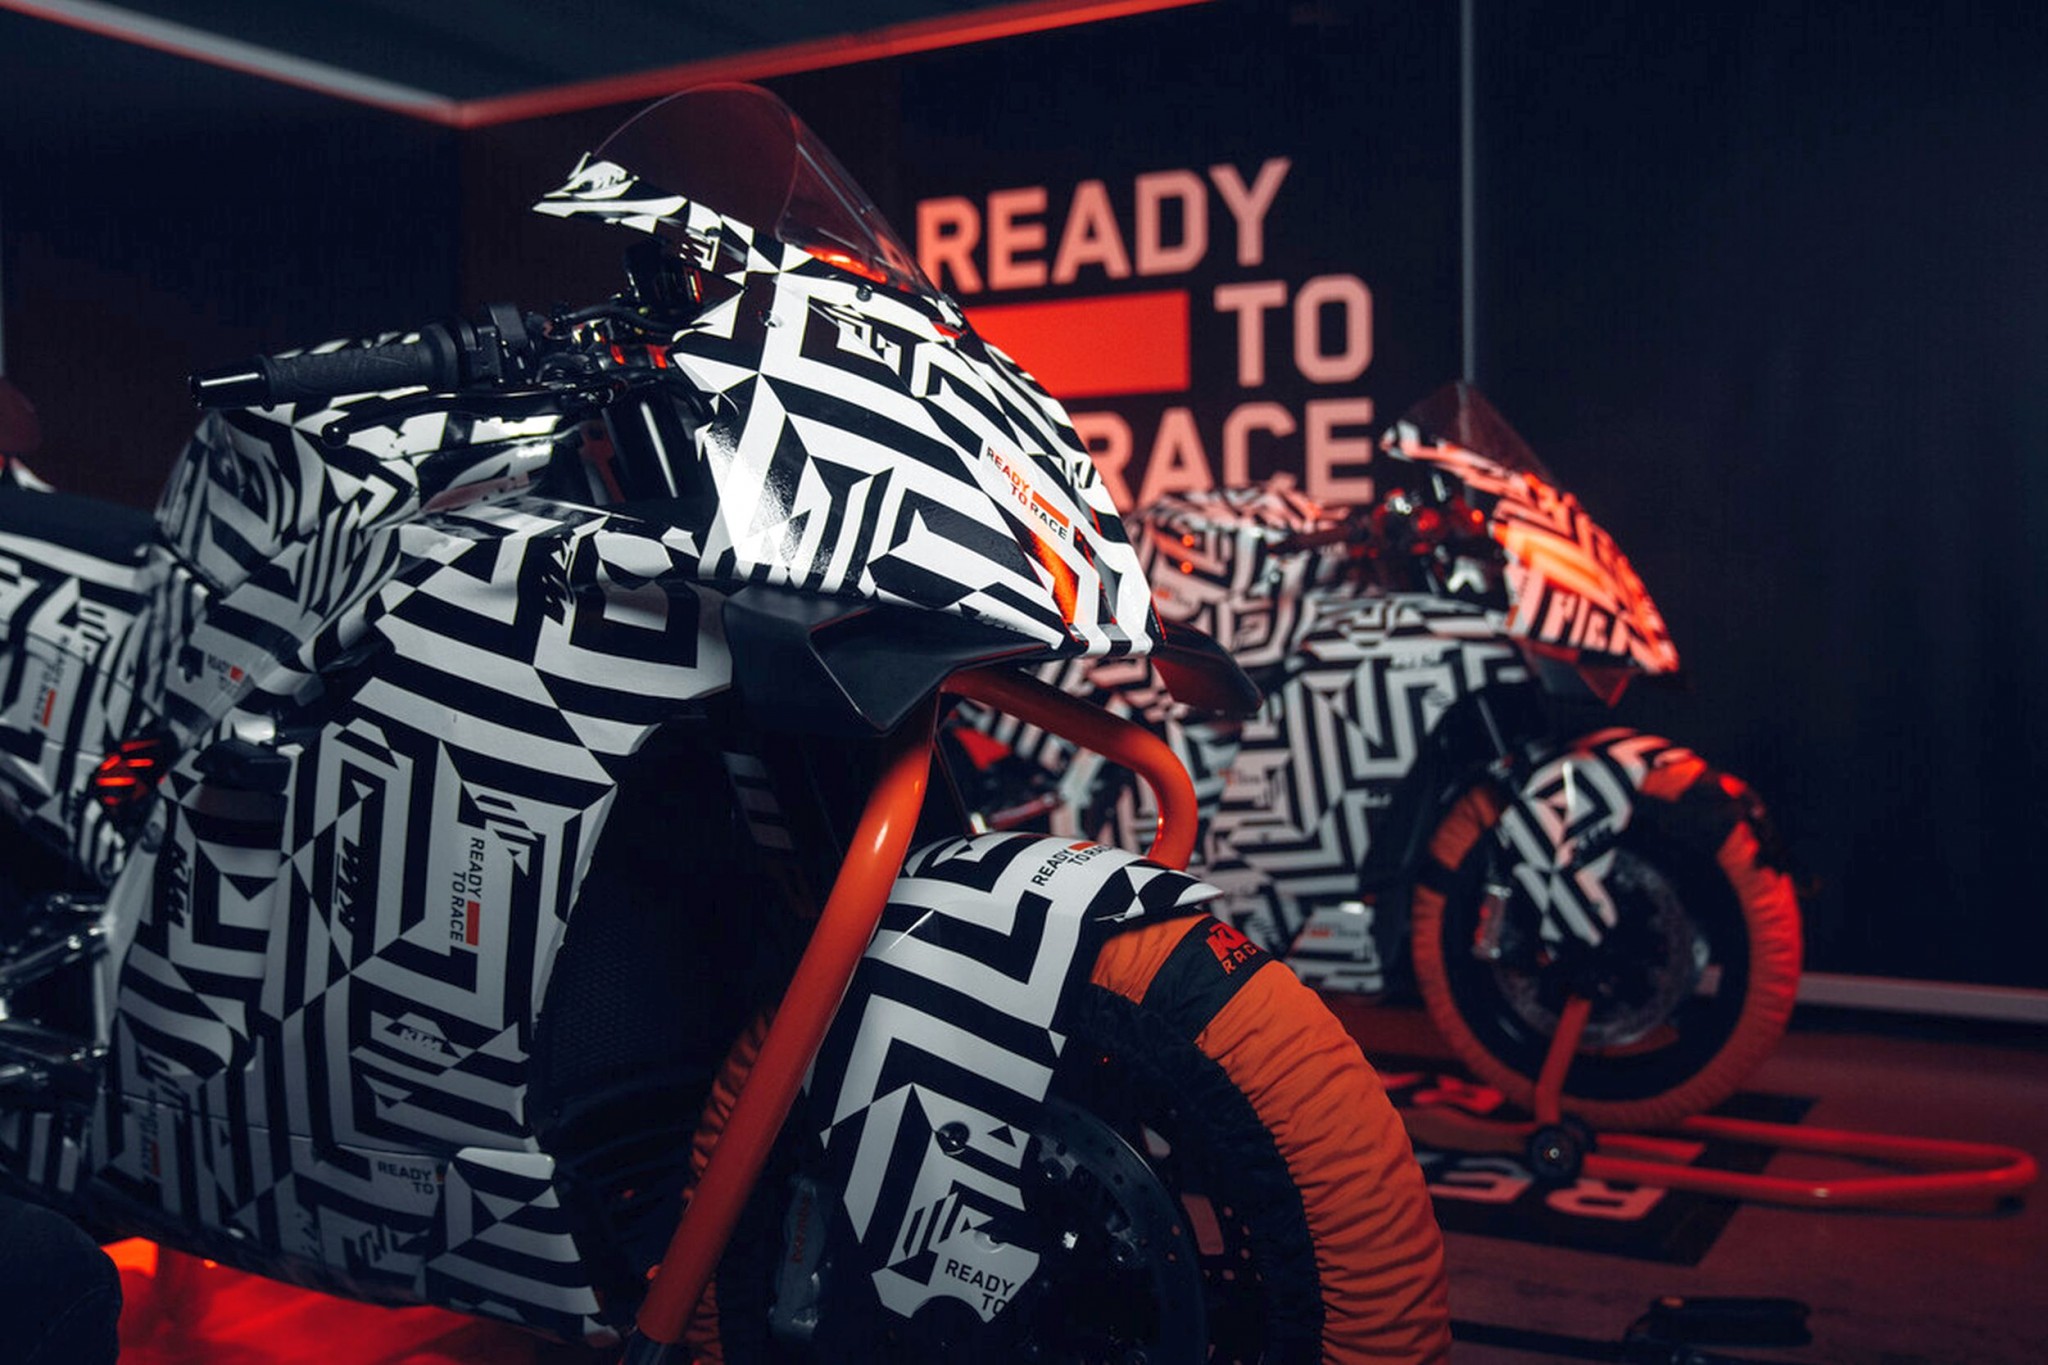 KTM 990 RC R - finally the thoroughbred sports bike for the road! - Image 33